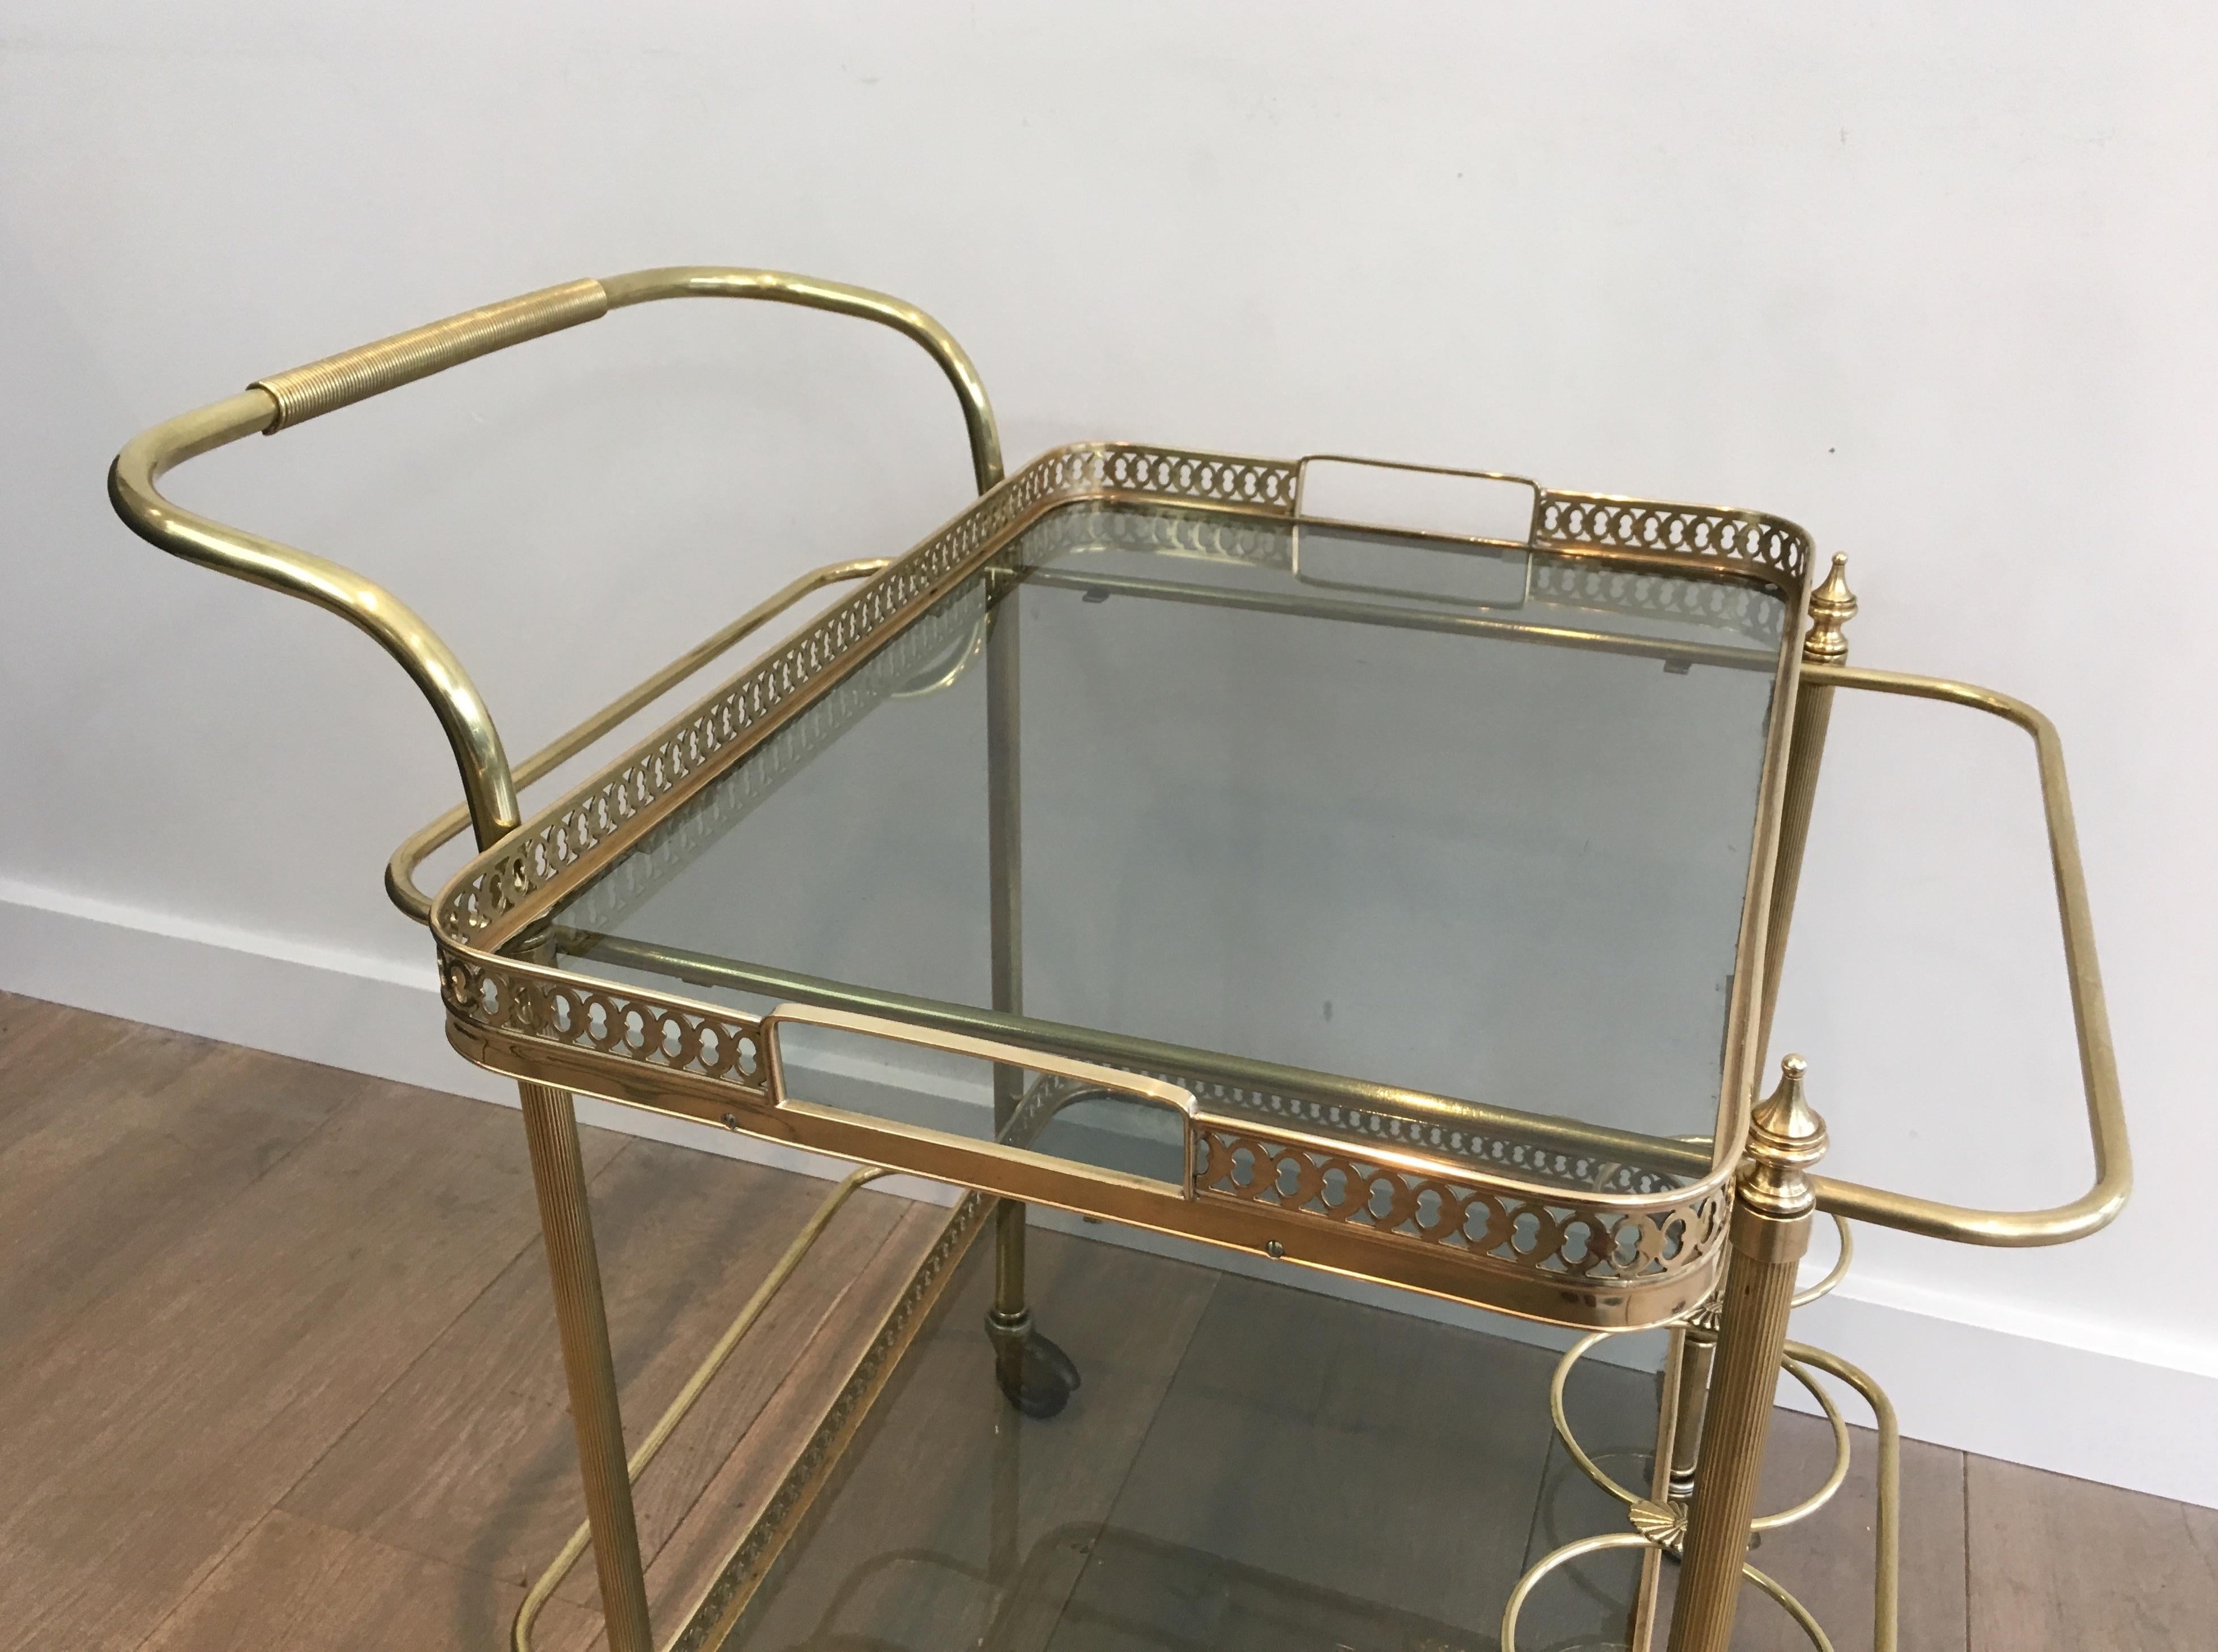 Mid-20th Century In the Style of Maison Jansen, Neoclassical Brass Bar Cart with Blueish Glass